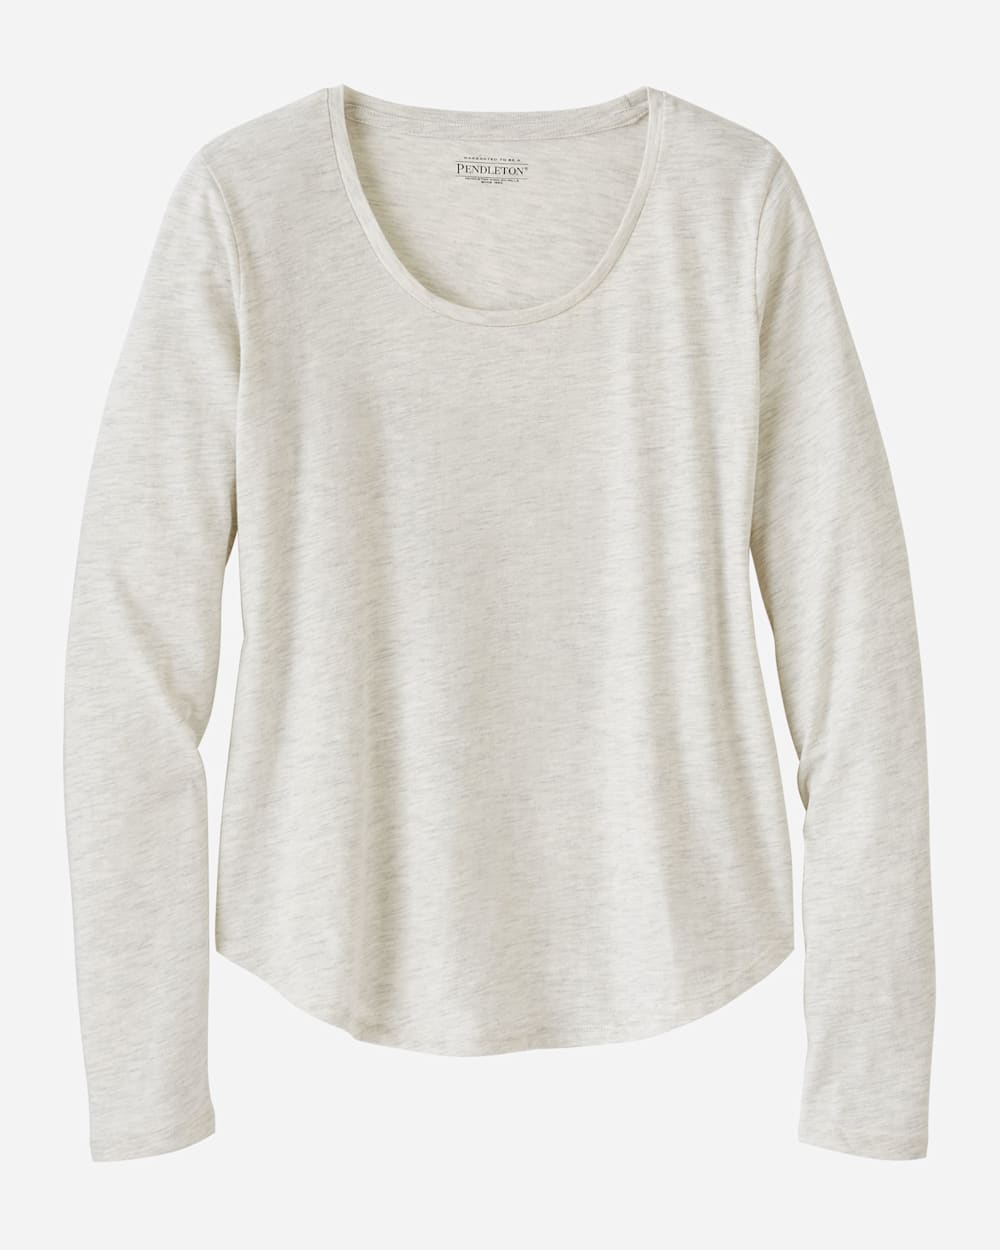 WOMEN'S LONG-SLEEVE JERSEY TEE IN GLACIER IVORY image number 1